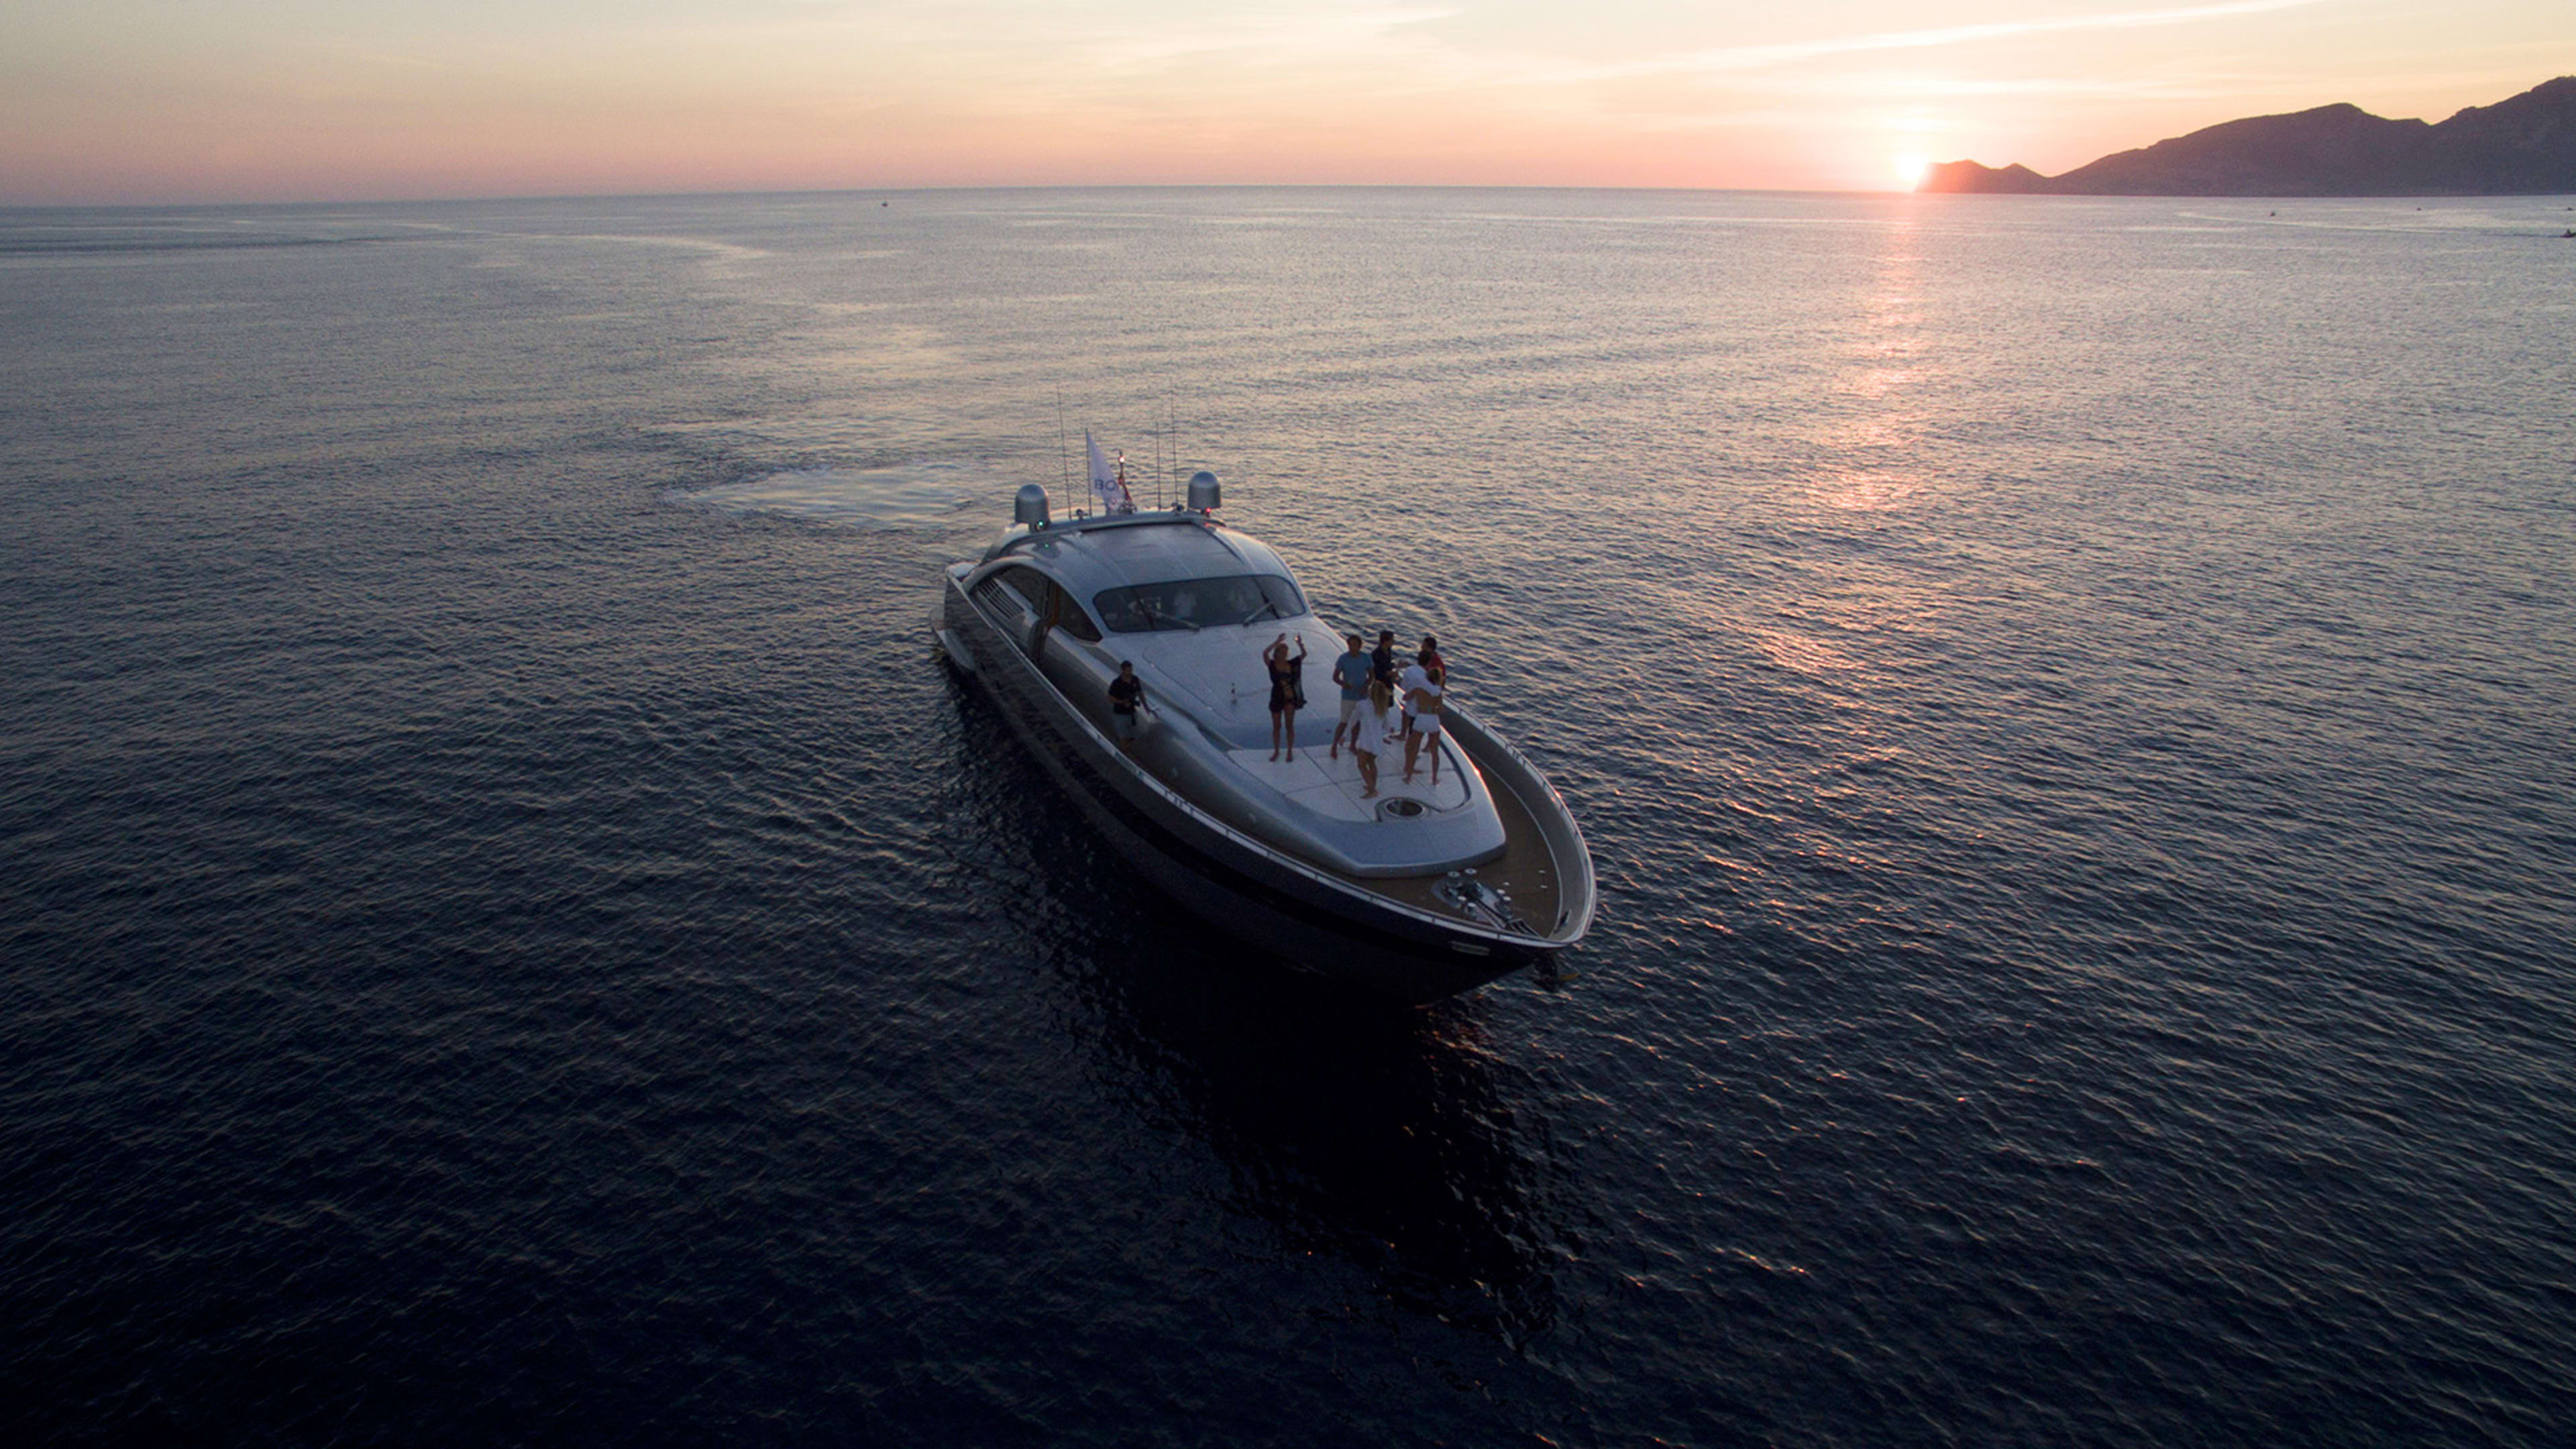 Sea Change: This Company Just Moved Its Office To A Boat Floating In The Mediterranean